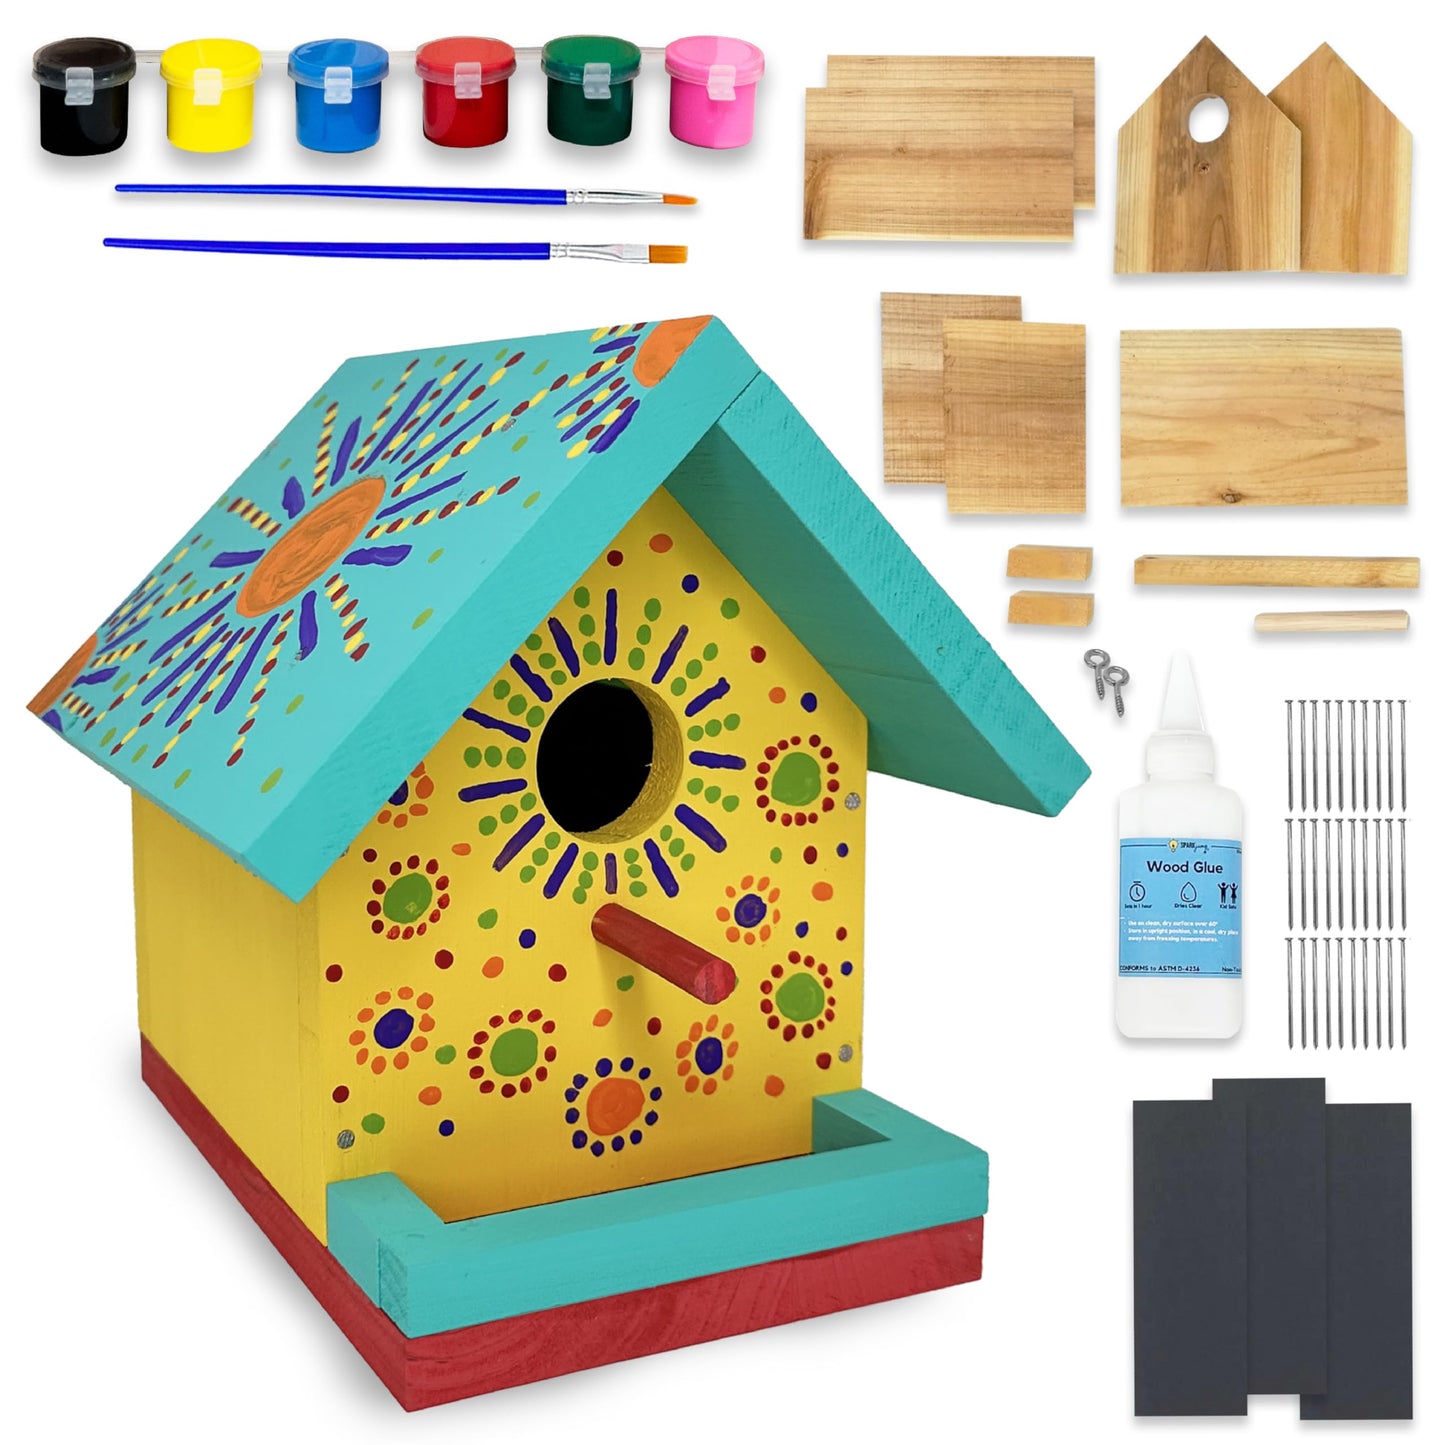 SparkJump Jr Bird House Kit | DIY Birdhouse Kits Made of Cedar Wood for Outdoors | Birdhouse Kits for Kids and Adults with Paint | Bird House Making